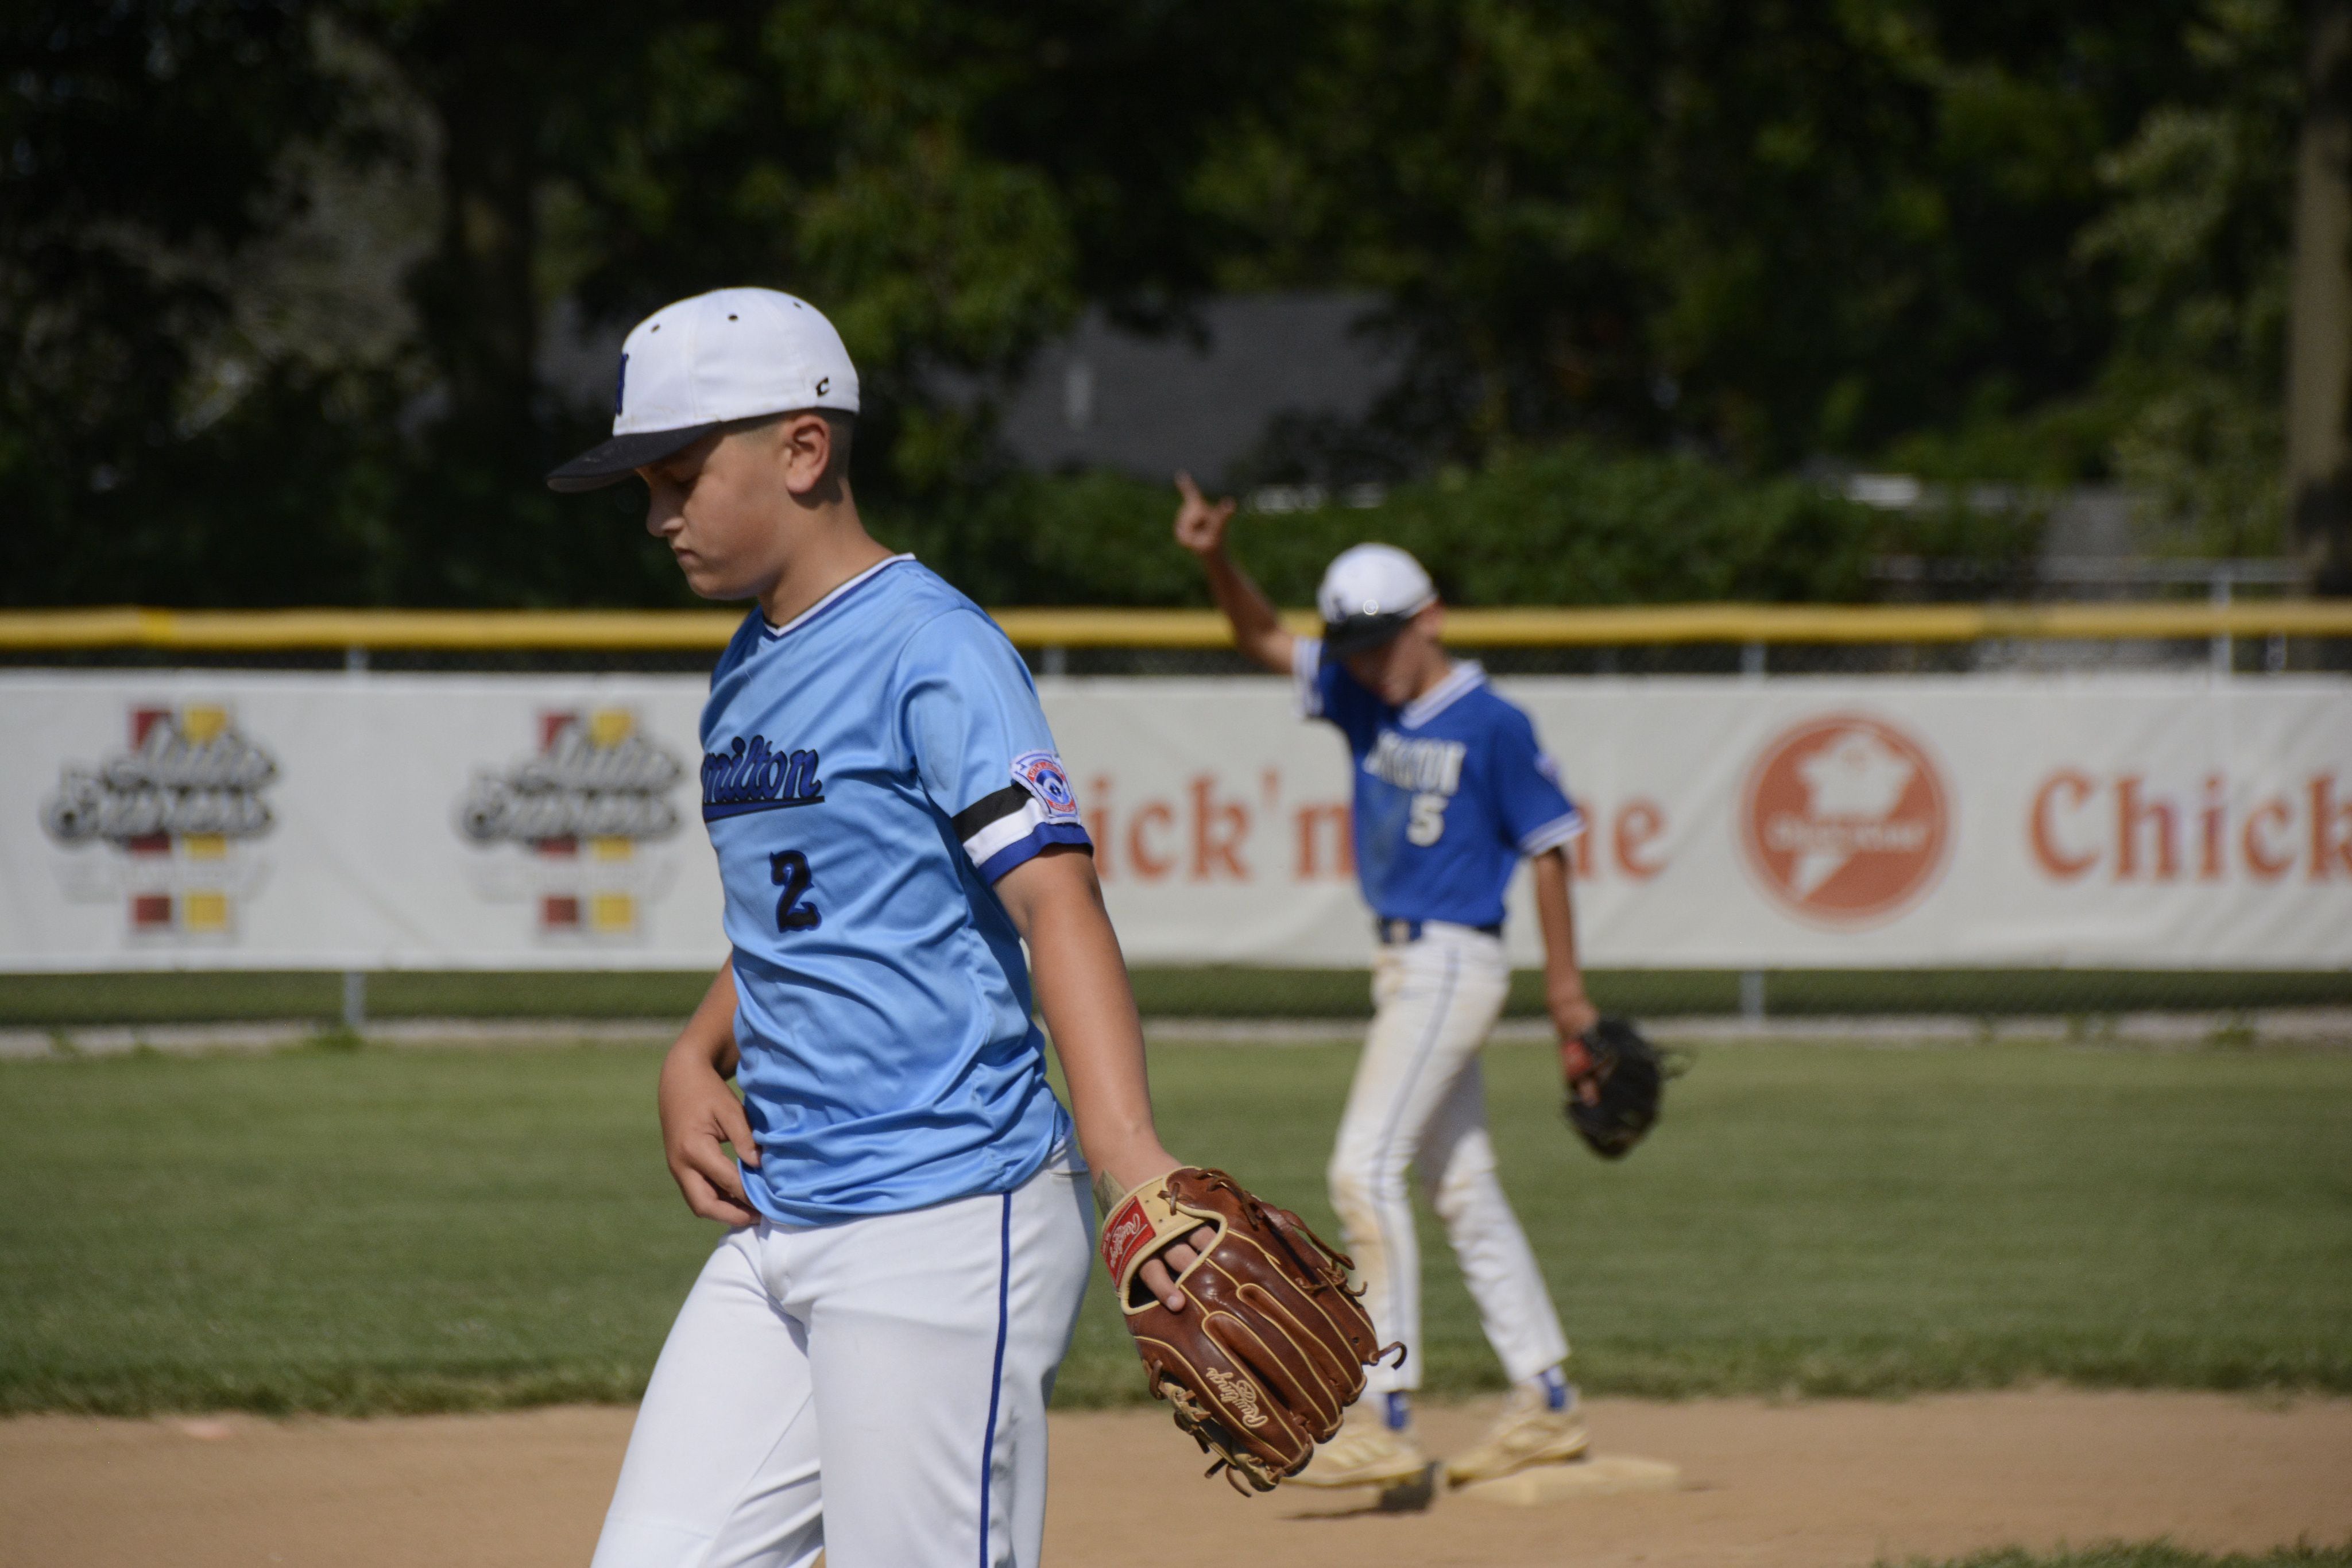 Hamilton's West Side All-Stars ready for Great Lakes Region tourney